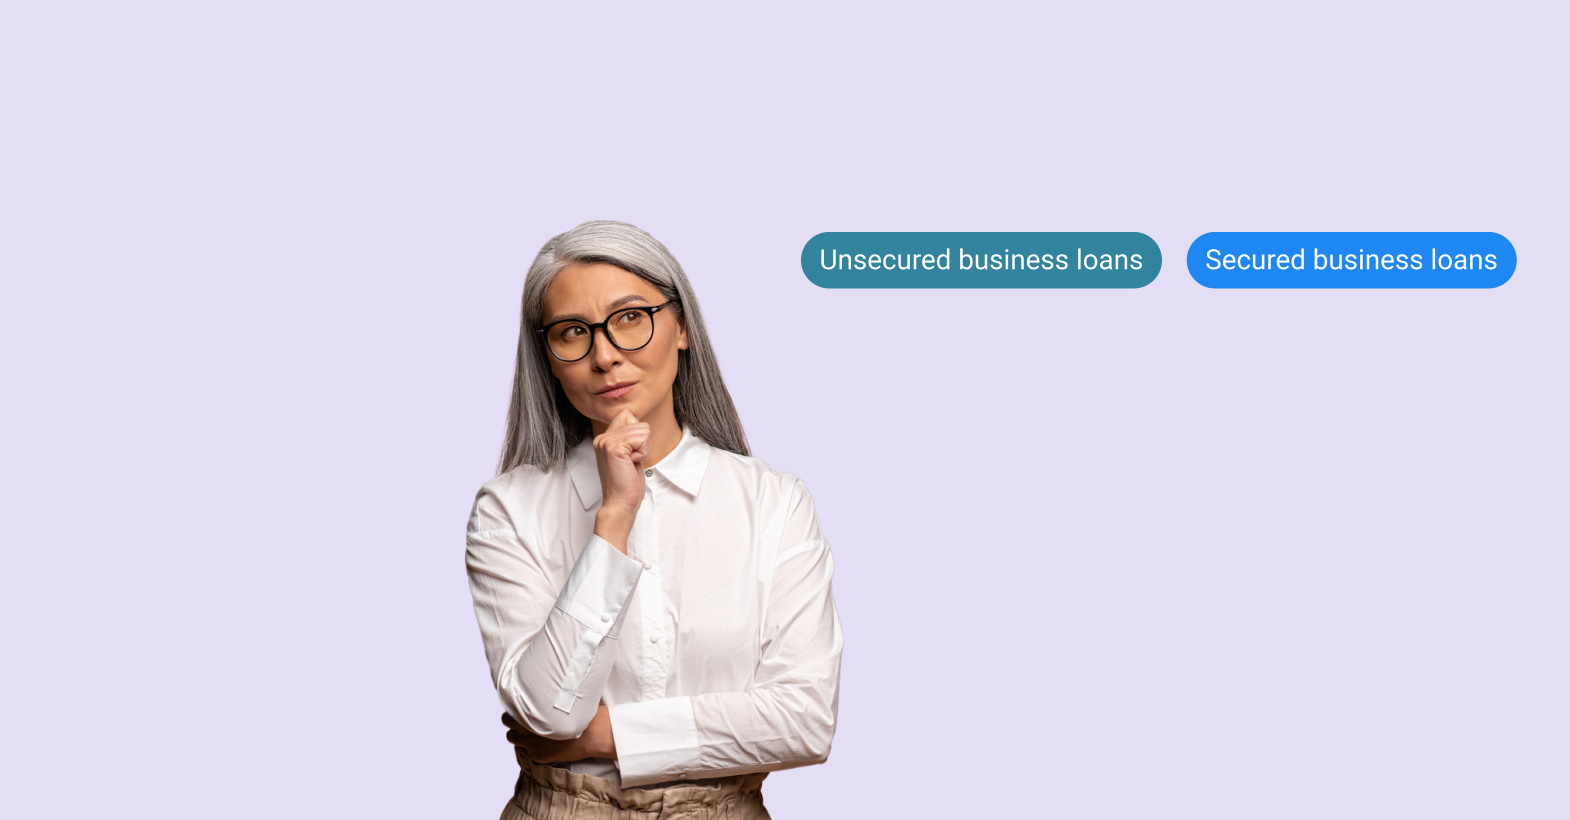 Unsecured business loans vs. secured business loans by Capitalise logo